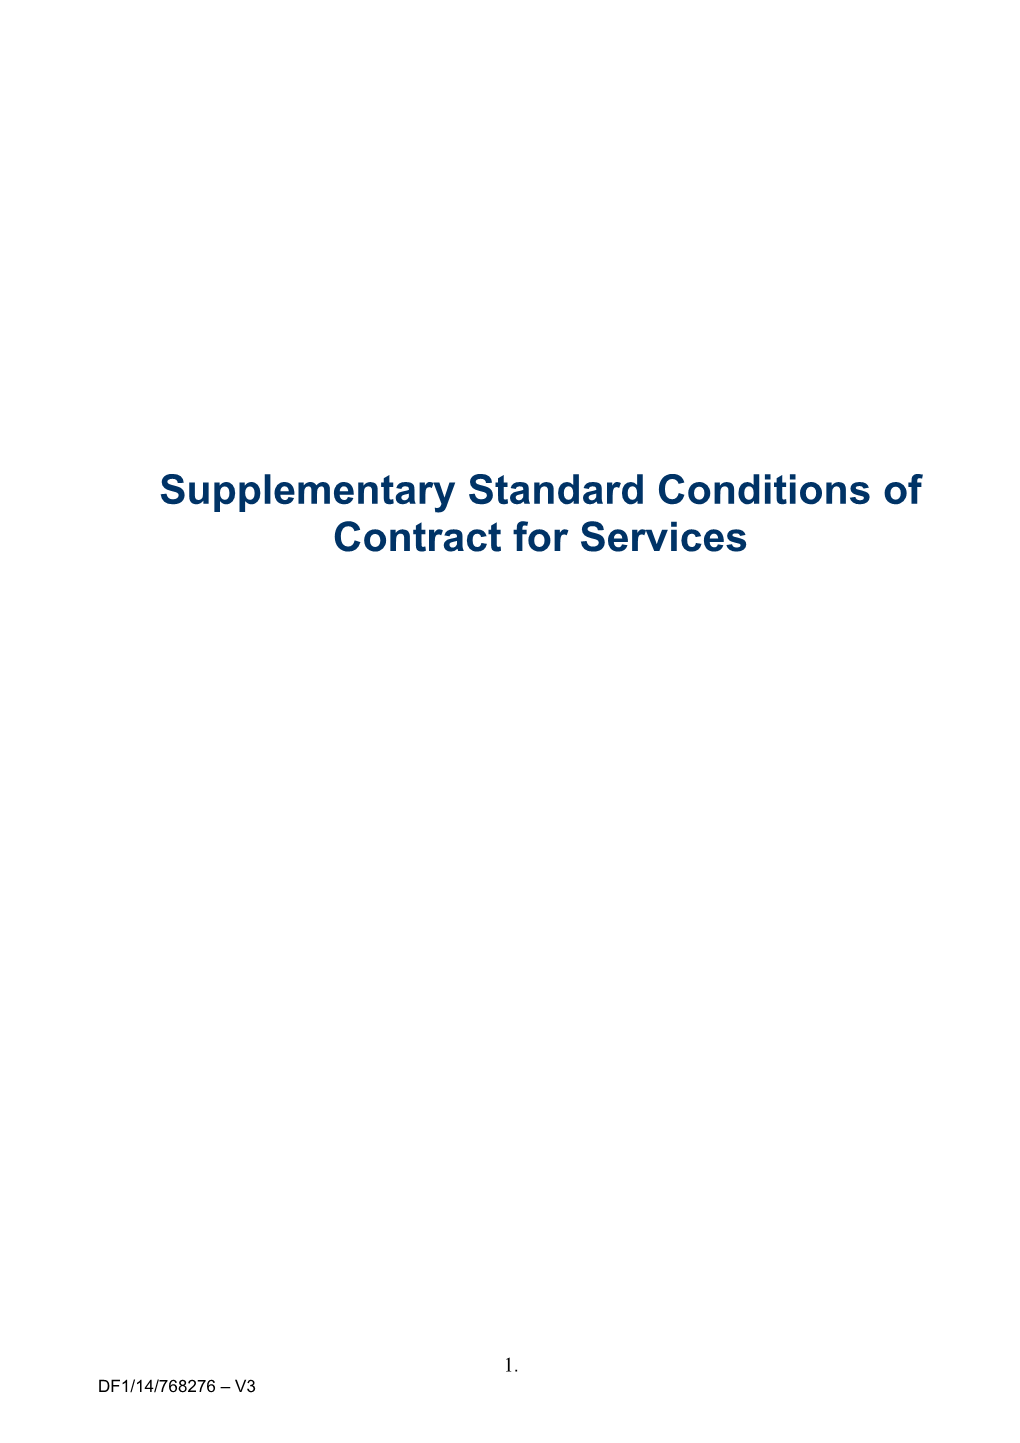 Supplementary Standard Conditions of Contract for Services